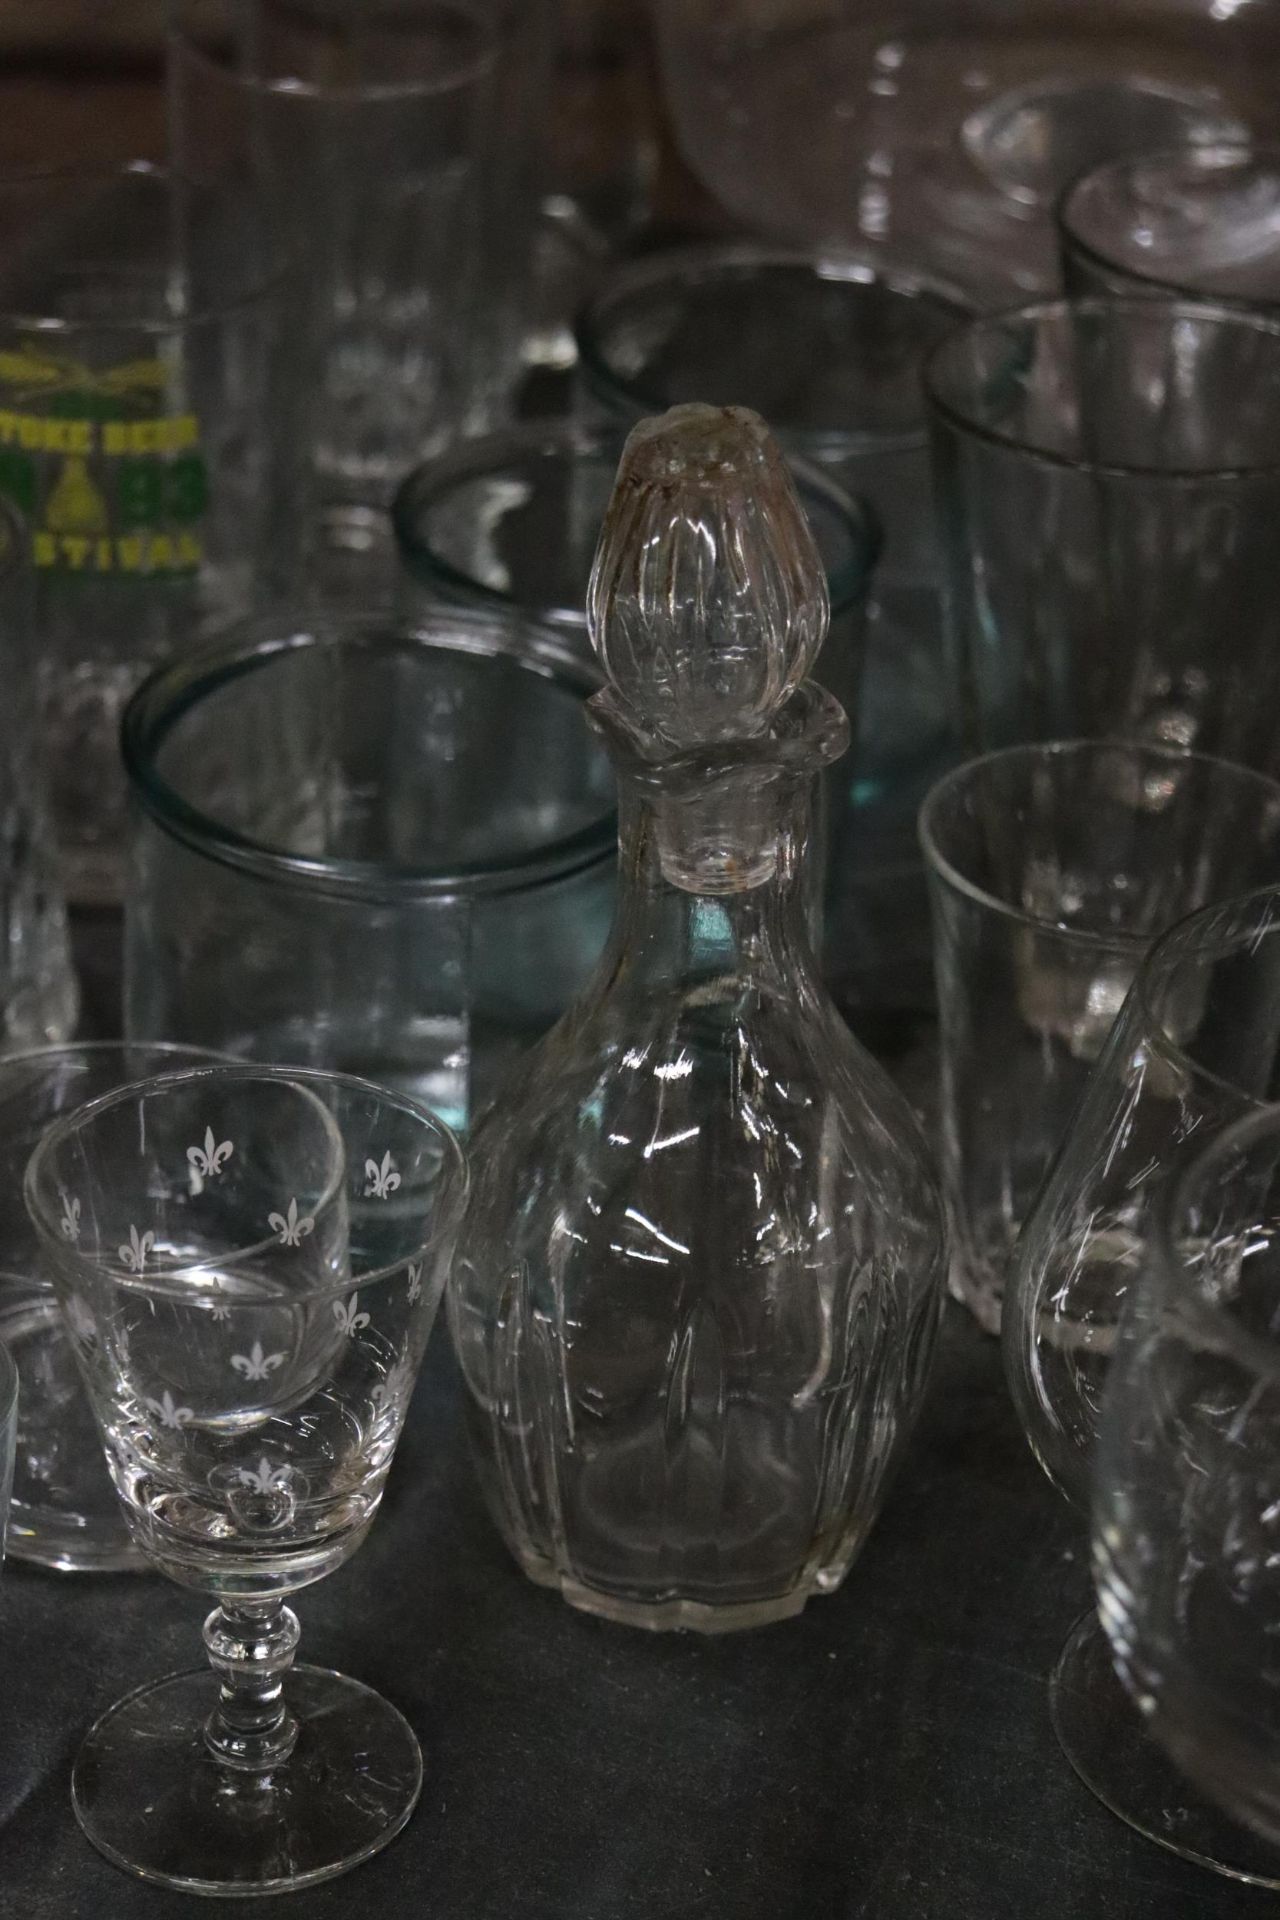 A QUANTITY OF GLASSWARE TO INCLUDE A LARGE FOOTED BOWL, GLASSES, TANKARDS, TUMBLERS, ETC - Image 10 of 12